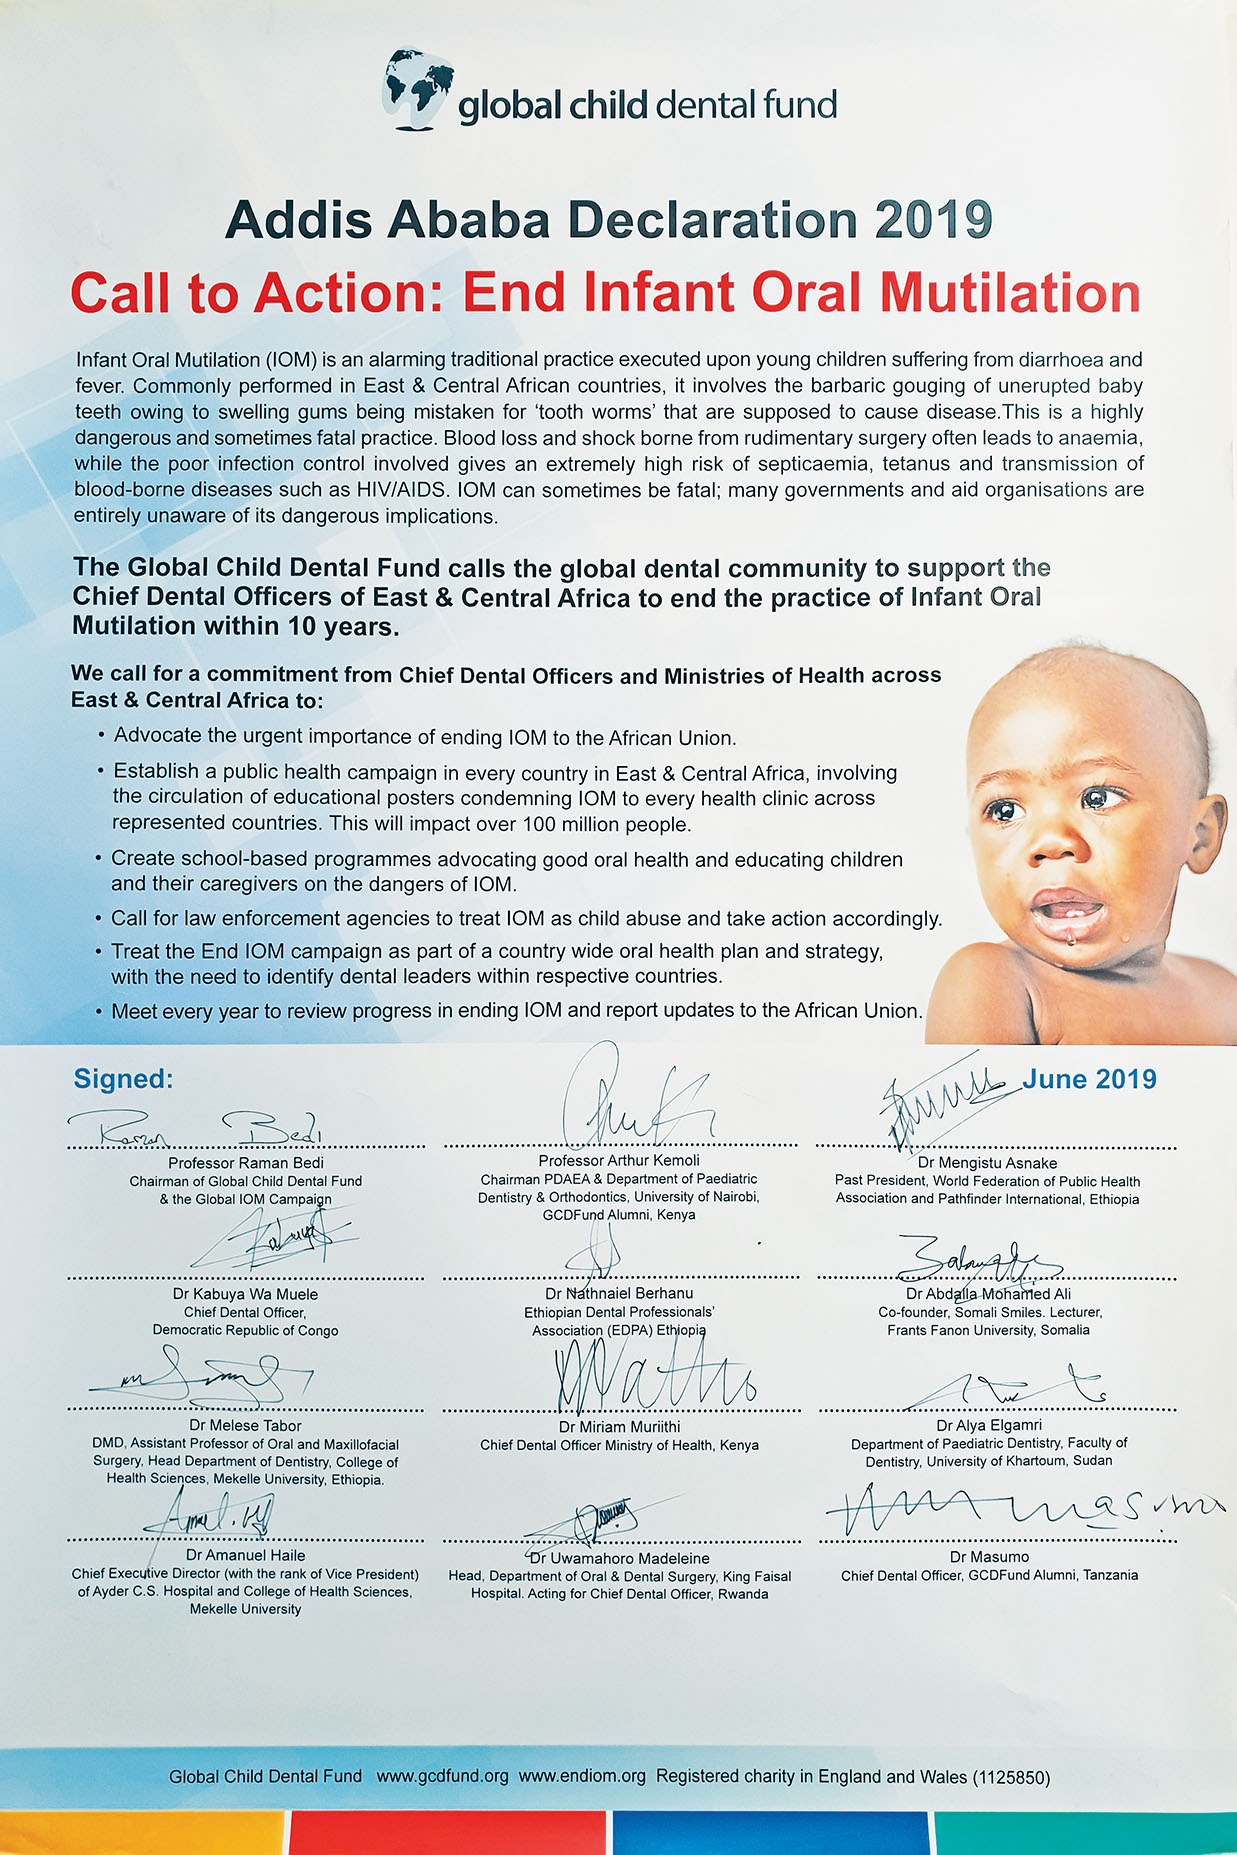 The signed declaration